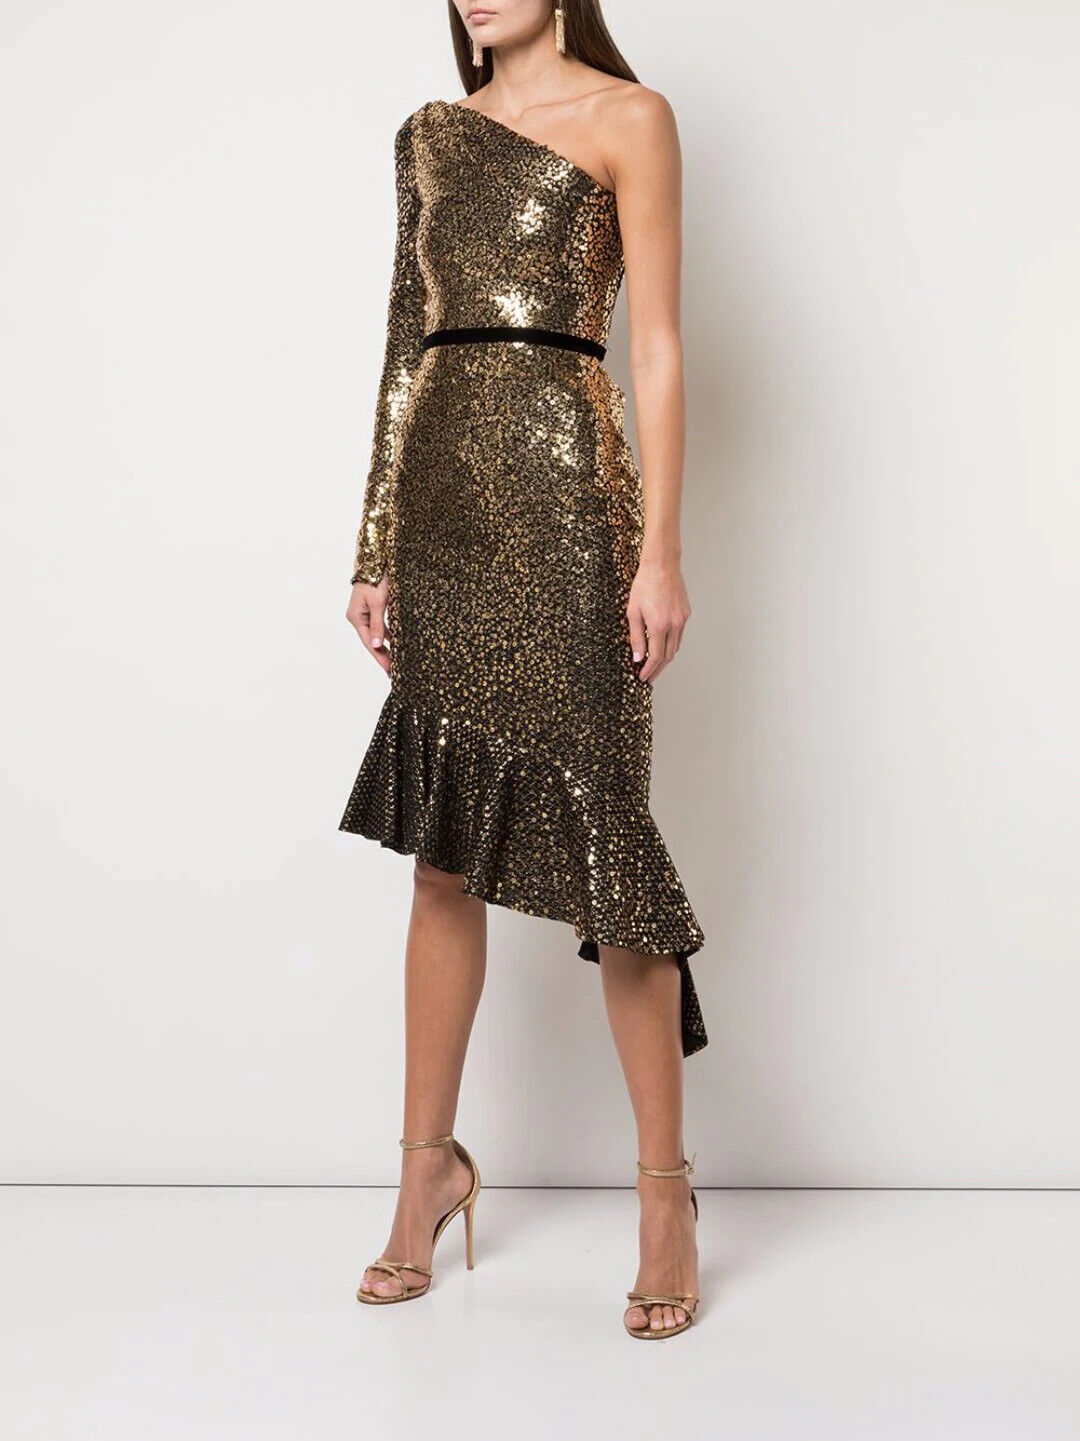 Pre-owned Marchesa Notte Glitter Ruffle Asymmetric Cocktail Dress 2 4 6 8 Rv$695 In Gold